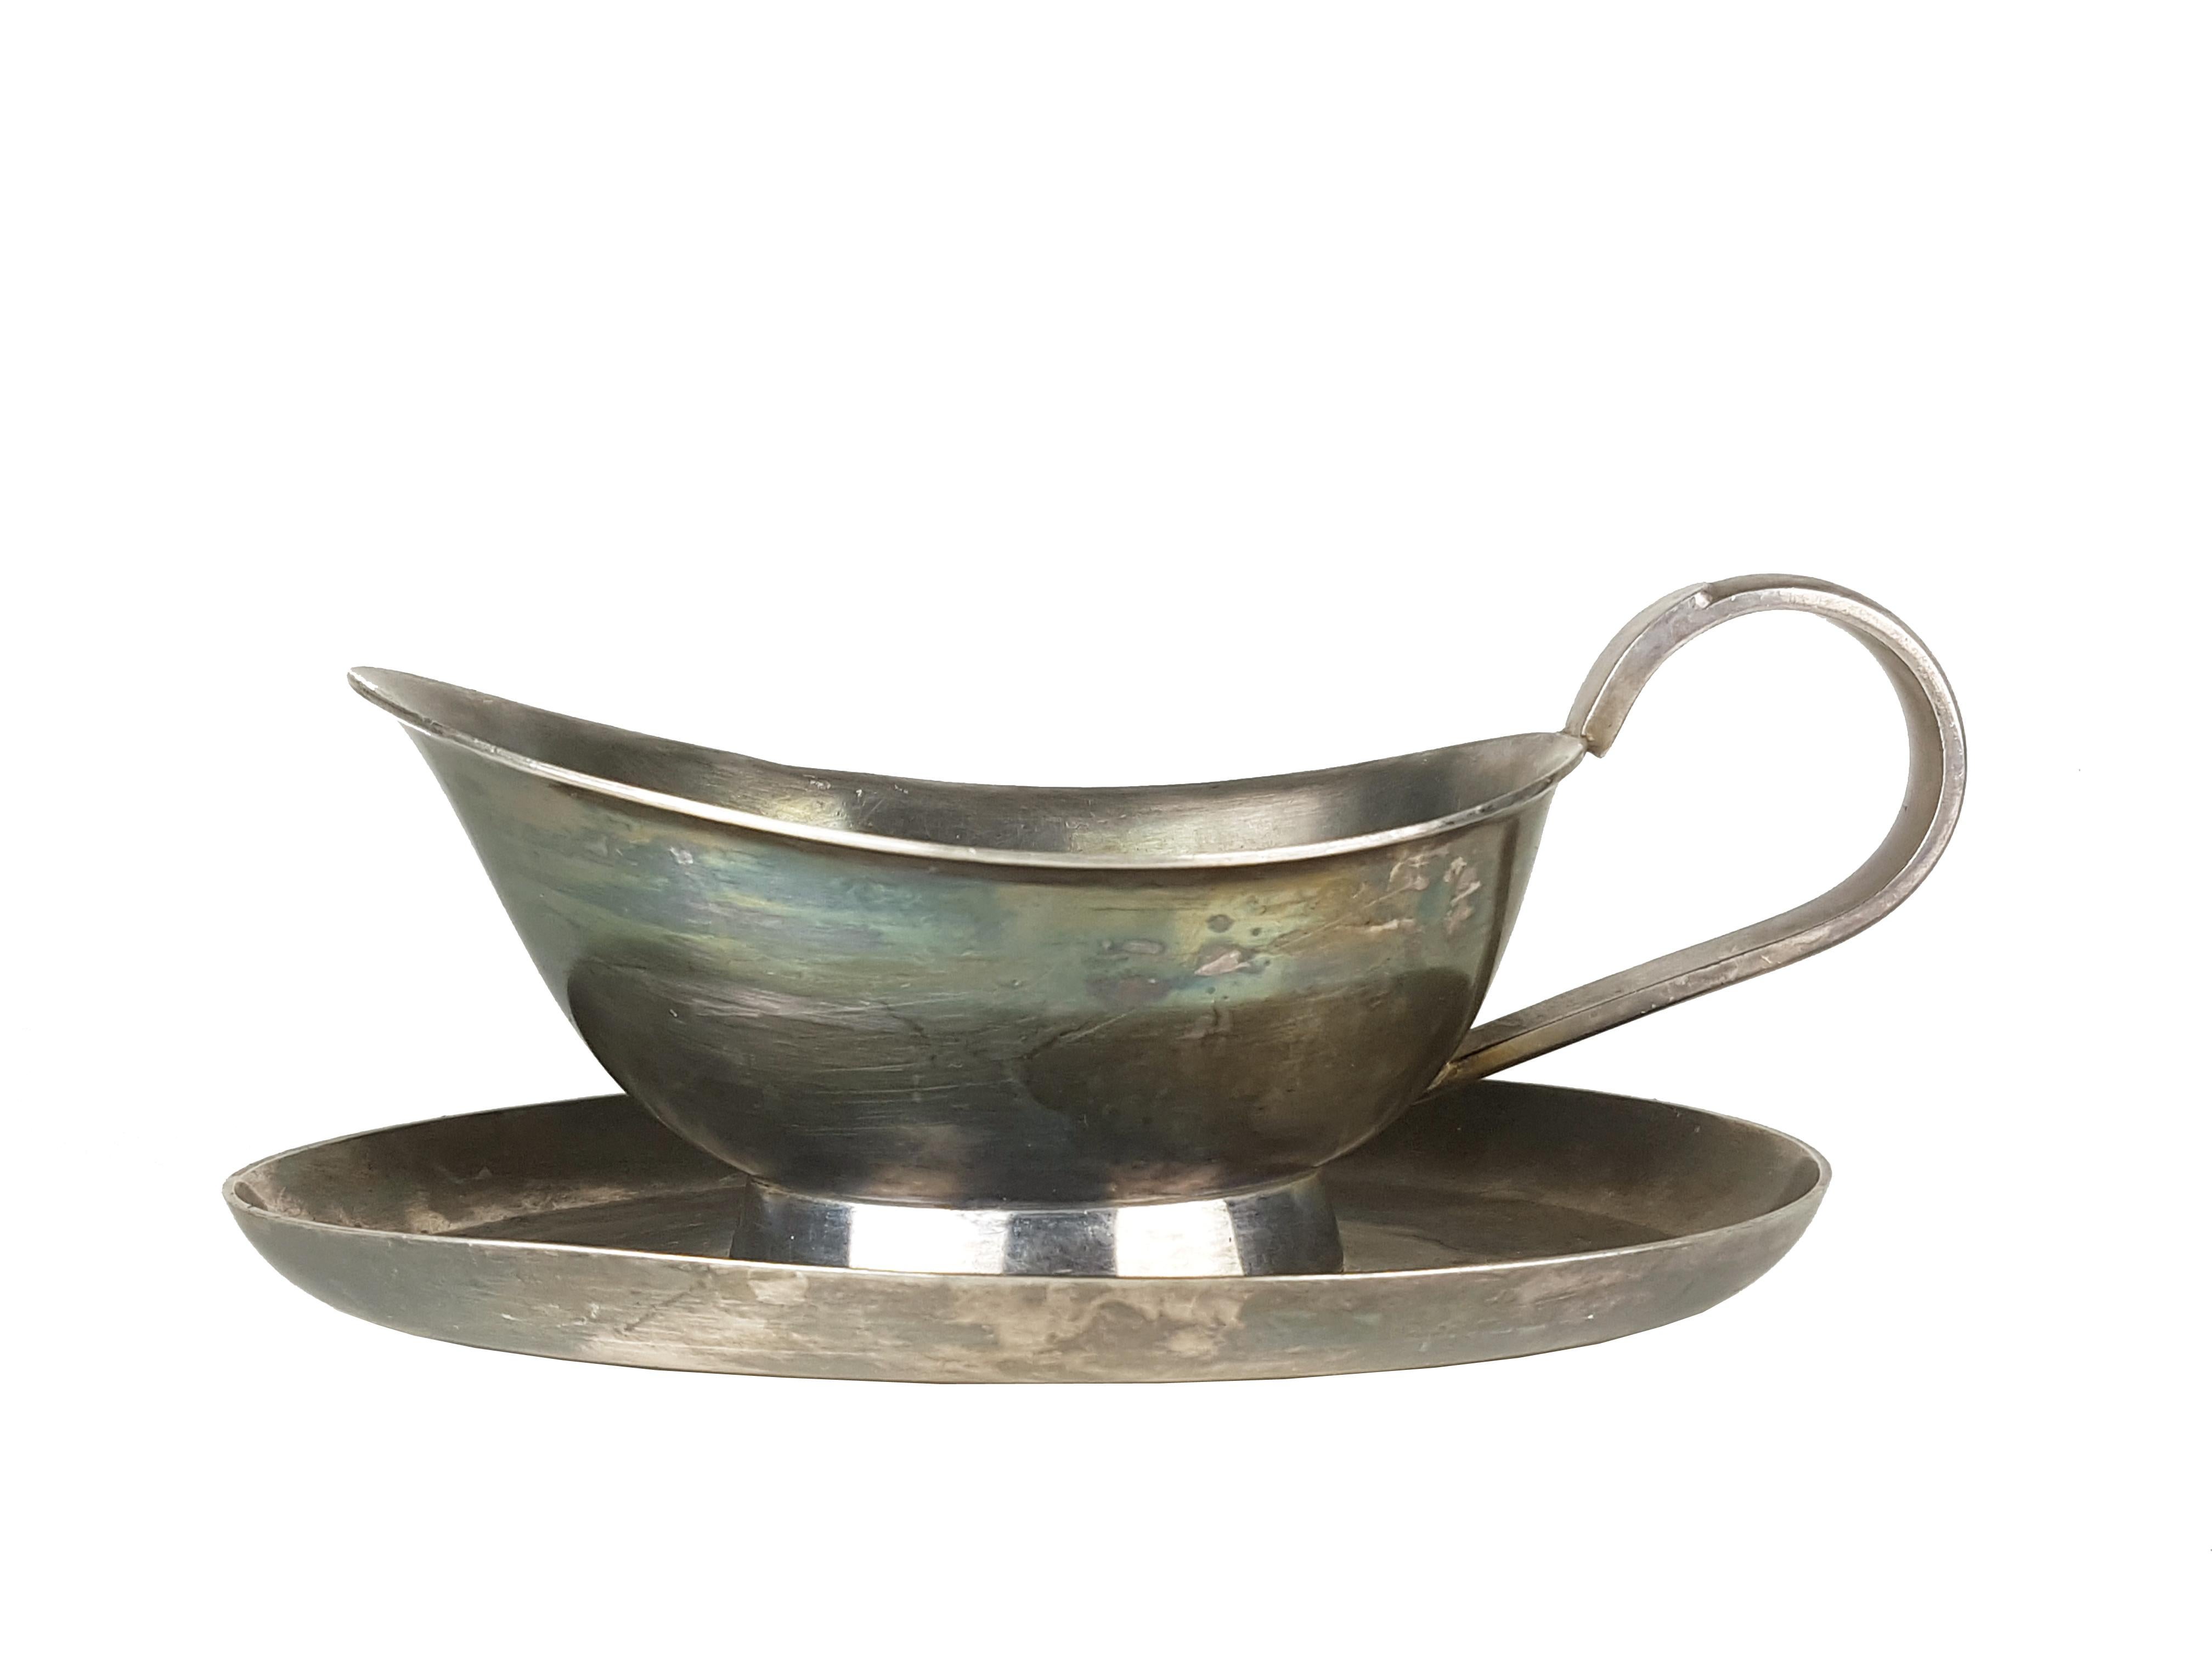 These rare Alpacca items were designed by Gio Ponti for Calderoni Argentieria in the 1930s. They remain in very good vintage condition: normal oxidation of silver metal which can be polished.
Dimensions:
Gravy boat: cm 7,5 h x 22 w x 14 d
Milk jug: